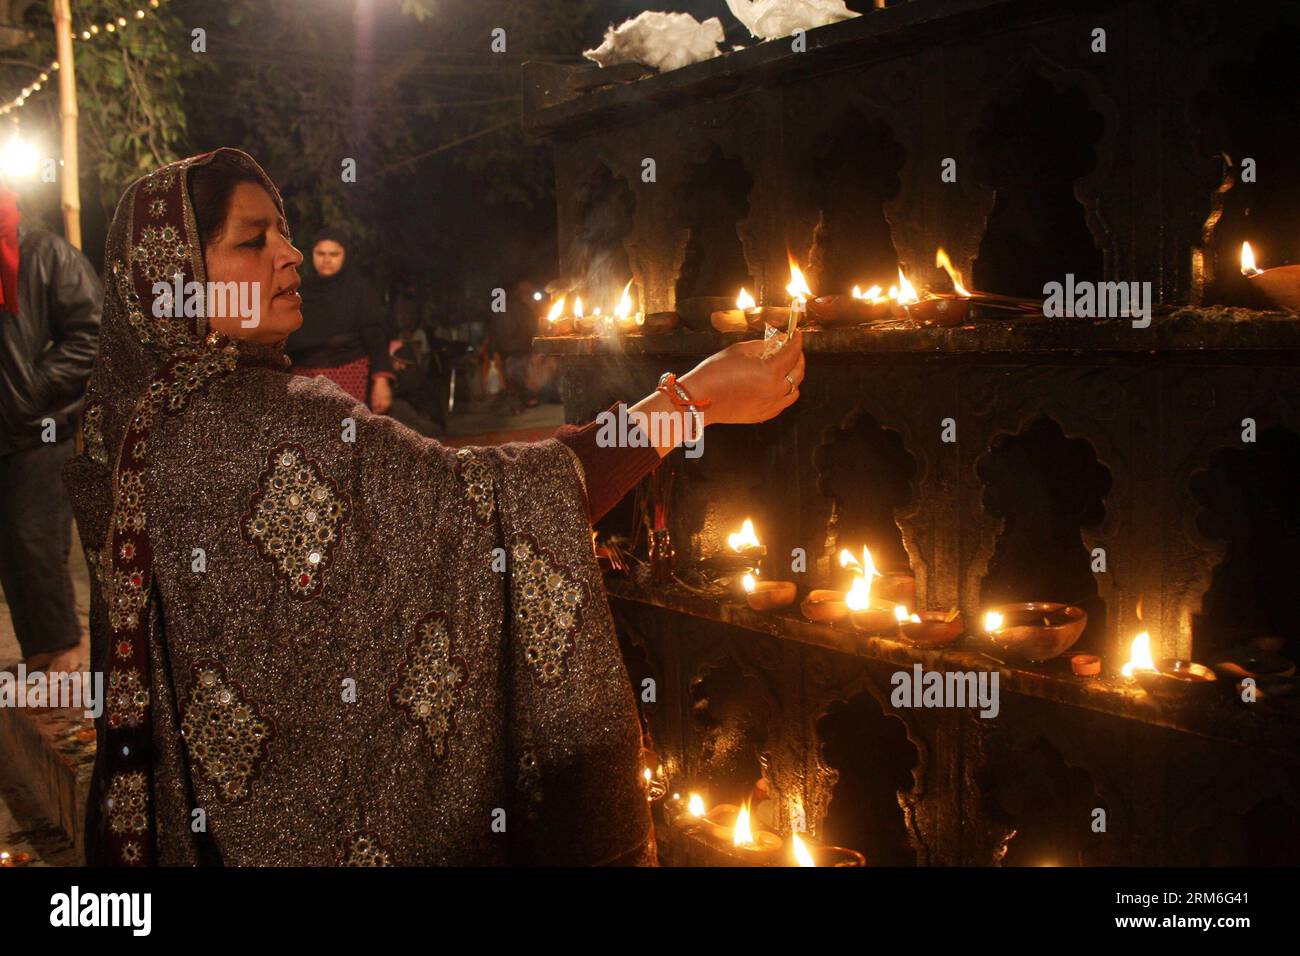 (140111) -- LAHORE, Jan. 11, 2014 (Xinhua) -- A Pakistani Muslim devotee lights oil lamps at the shrine of the Sufi saint Mian Mir Sahib during the last day of a three-day festival marking his 369th death anniversary in eastern Pakistan s Lahore on Jan. 11, 2014. (Xinhua/Jamil Ahmed) (djj) PAKISTAN-LAHORE-RELIGION-SHRINE PUBLICATIONxNOTxINxCHN   Lahore Jan 11 2014 XINHUA a Pakistani Muslim devotee Lights Oil lamps AT The Shrine of The Sufi Saint Mian me Sahib during The Load Day of a Three Day Festival marking His  Death Anniversary in Eastern Pakistan S Lahore ON Jan 11 2014 XINHUA Jamil Ahme Stock Photo